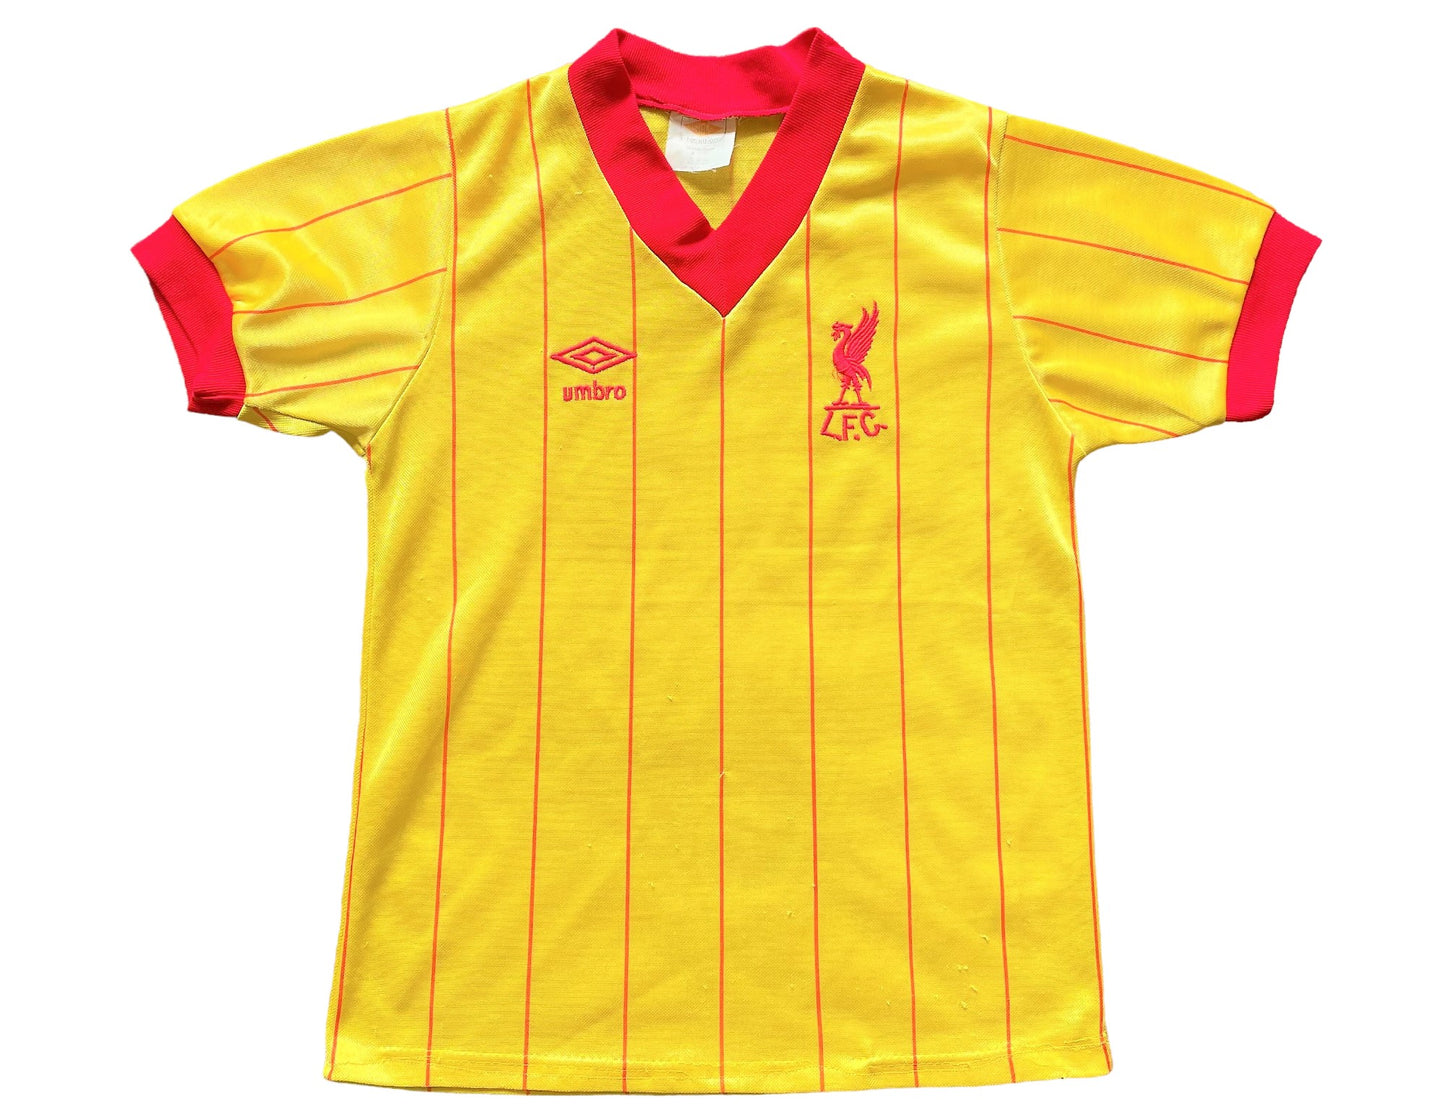 Liverpool 1981 Away Shirt (good) AdultsXXS/Youths 30-32. Height 17 inches